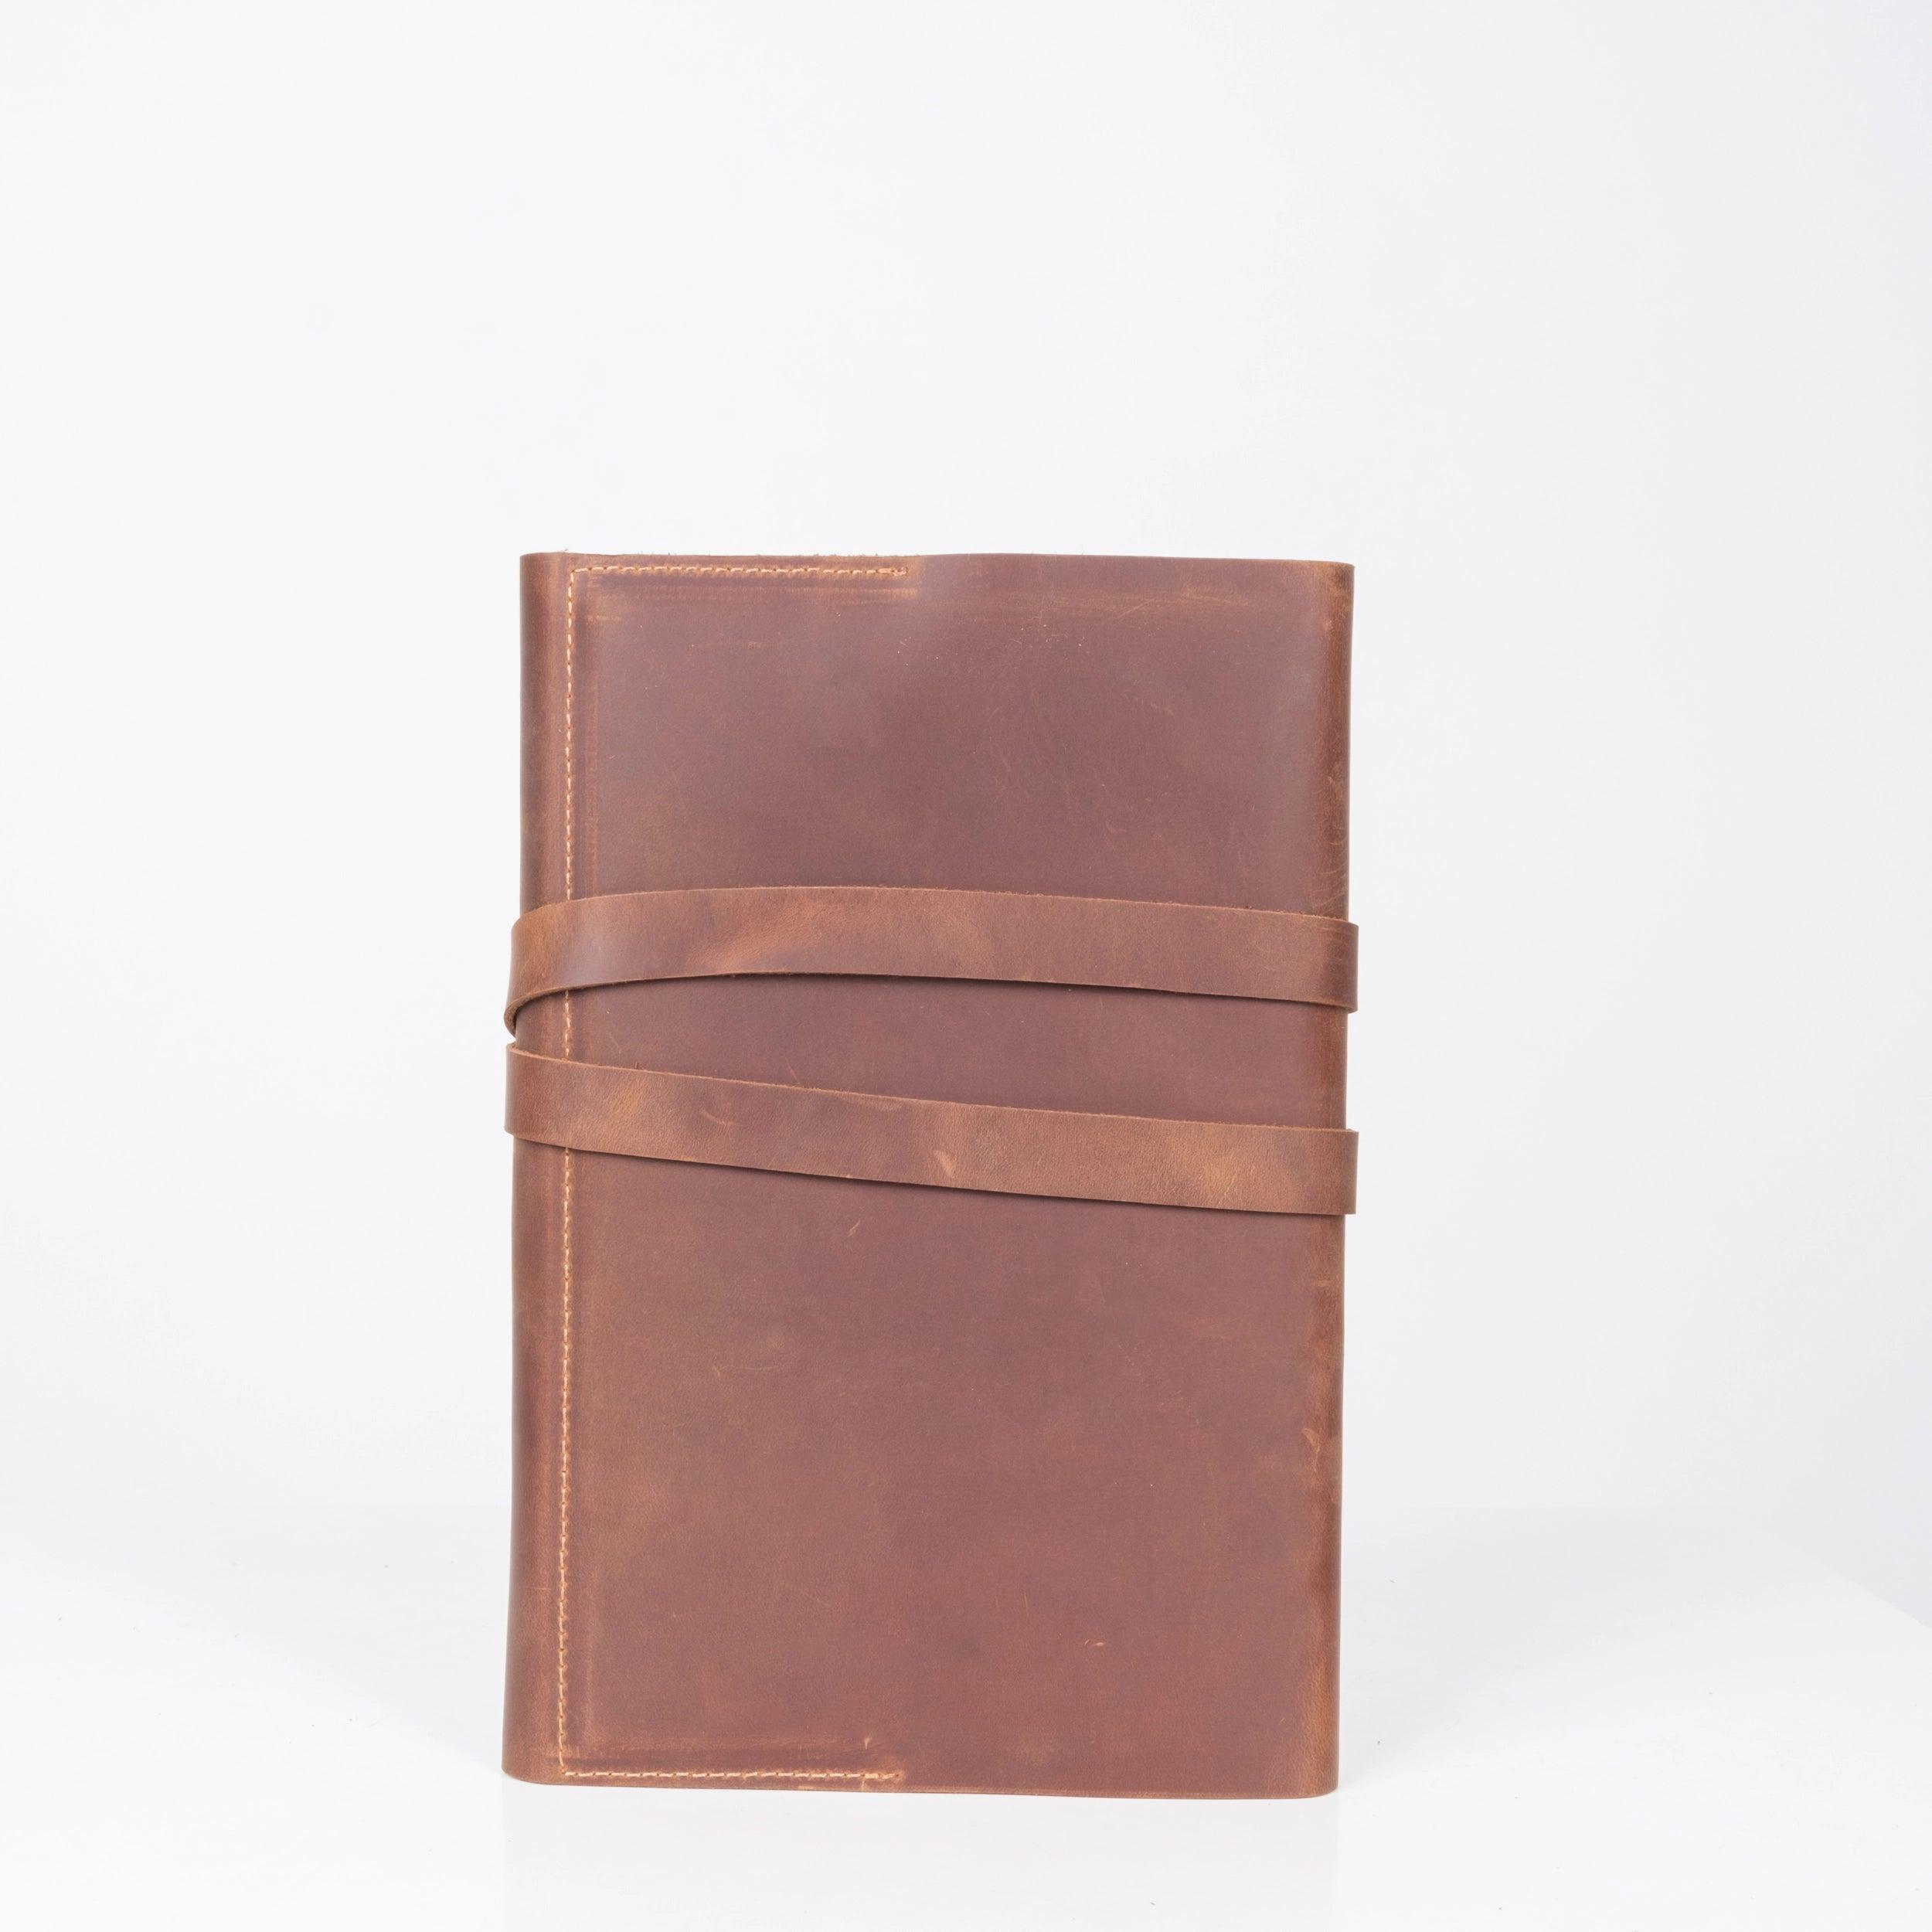 Leather Book Cover "Vintage" - Pikore